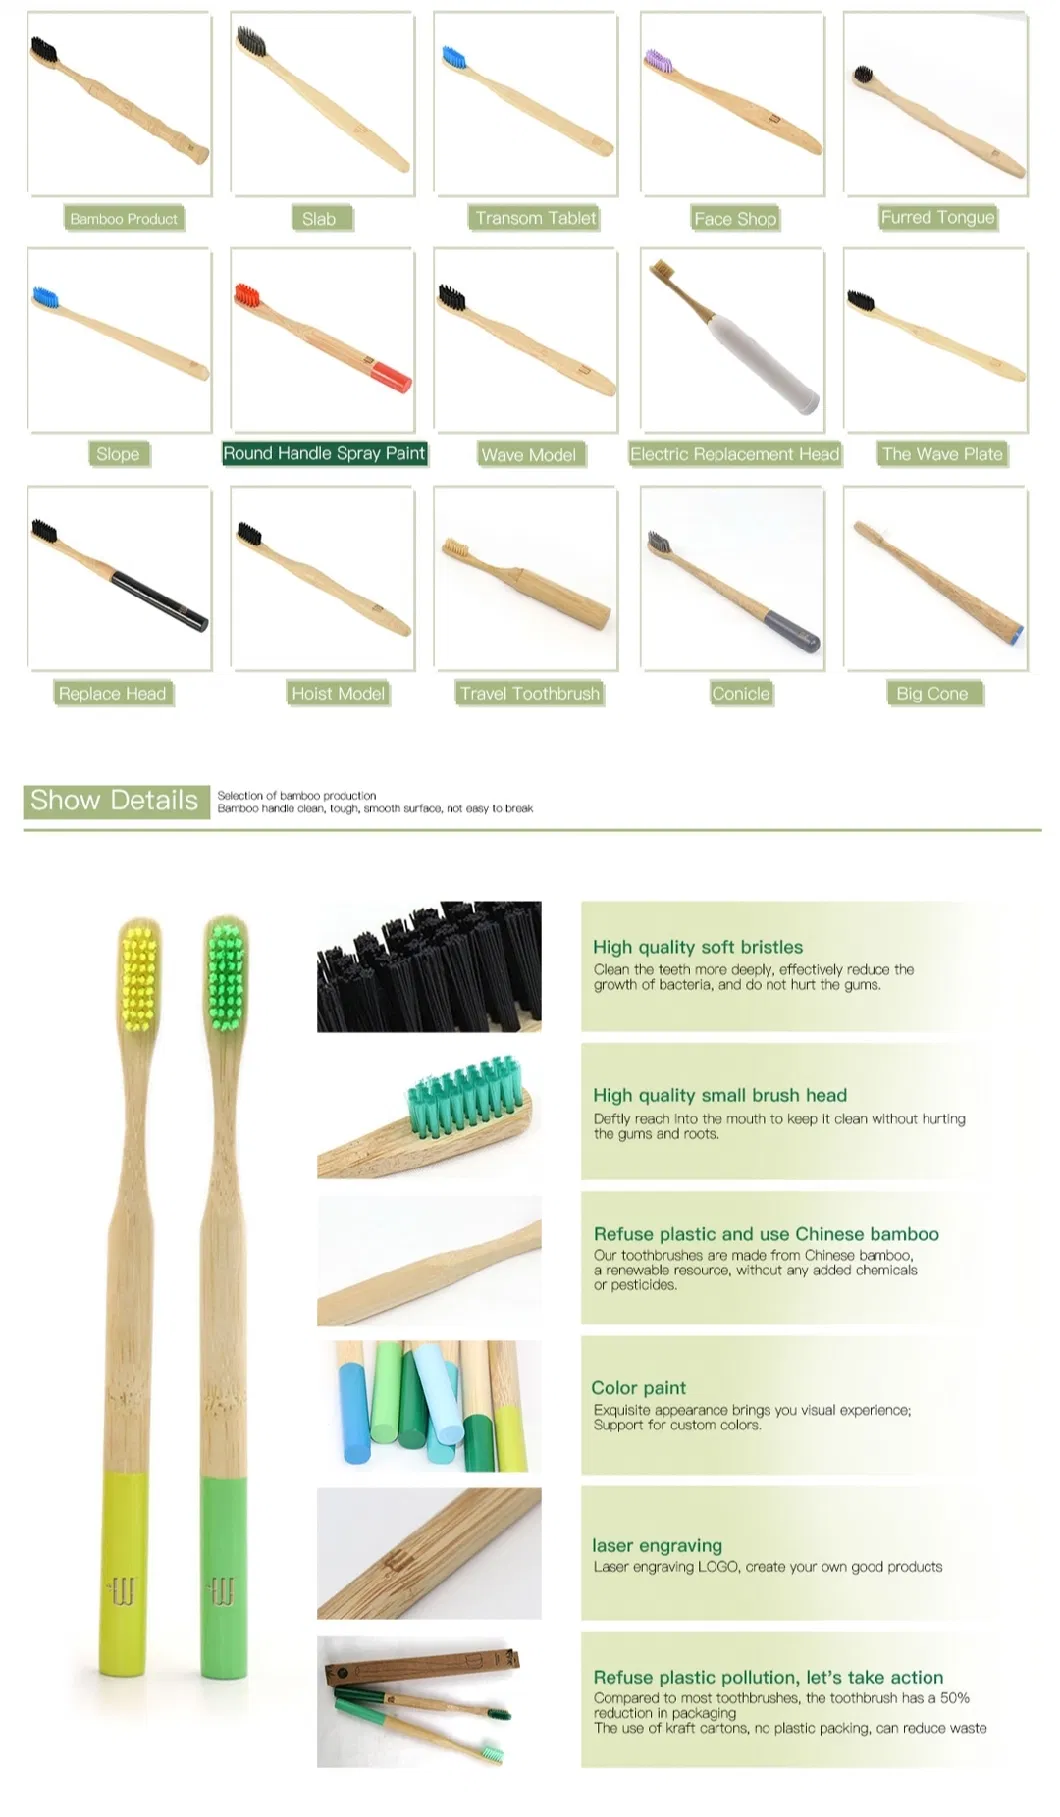 Personal Care Tooth Brush Biodegradable Adult Bamboo Toothbrush